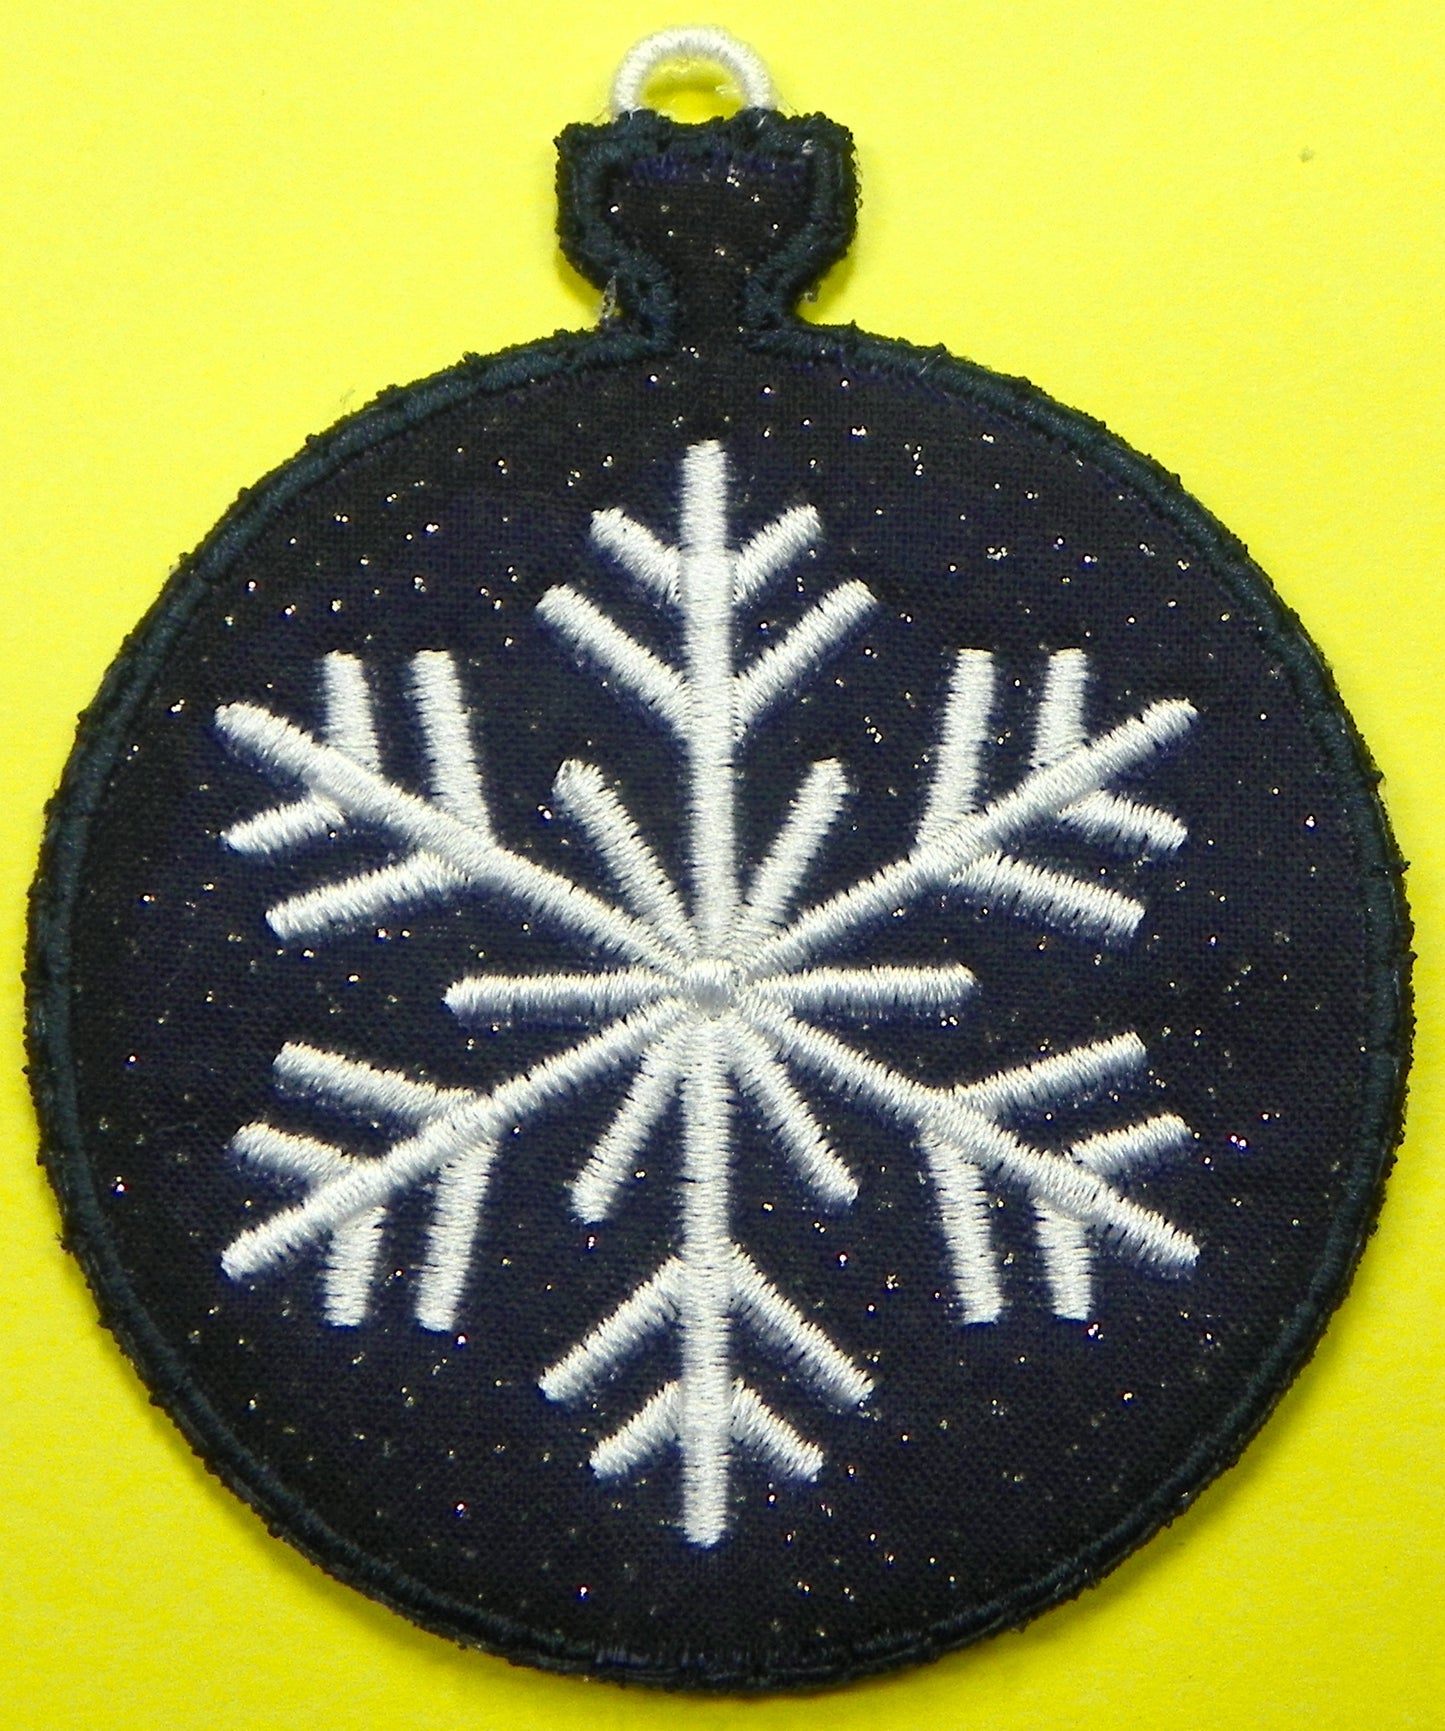 In-The-Hoop  Double Sided Snowflake Ornaments Project [4x4] # 10399